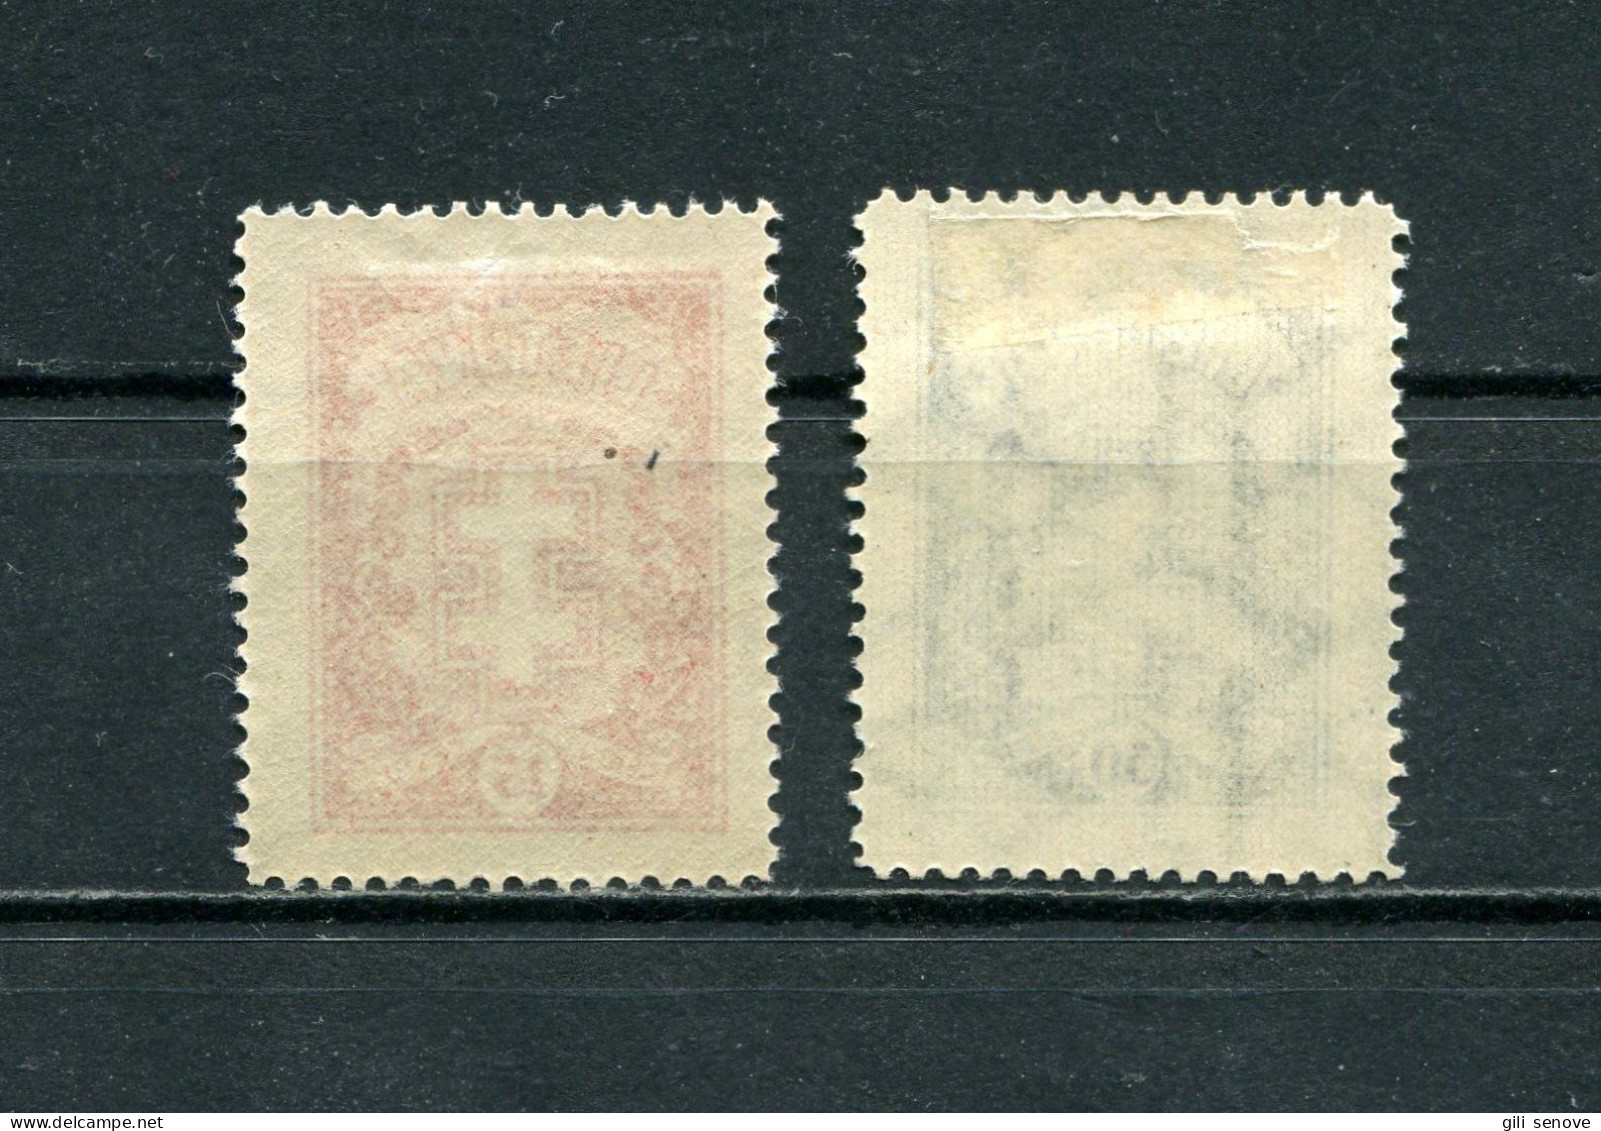 Lithuania 1930 Mi. 291-292 Definitive Issue Cross MNH**/MH* - Litouwen